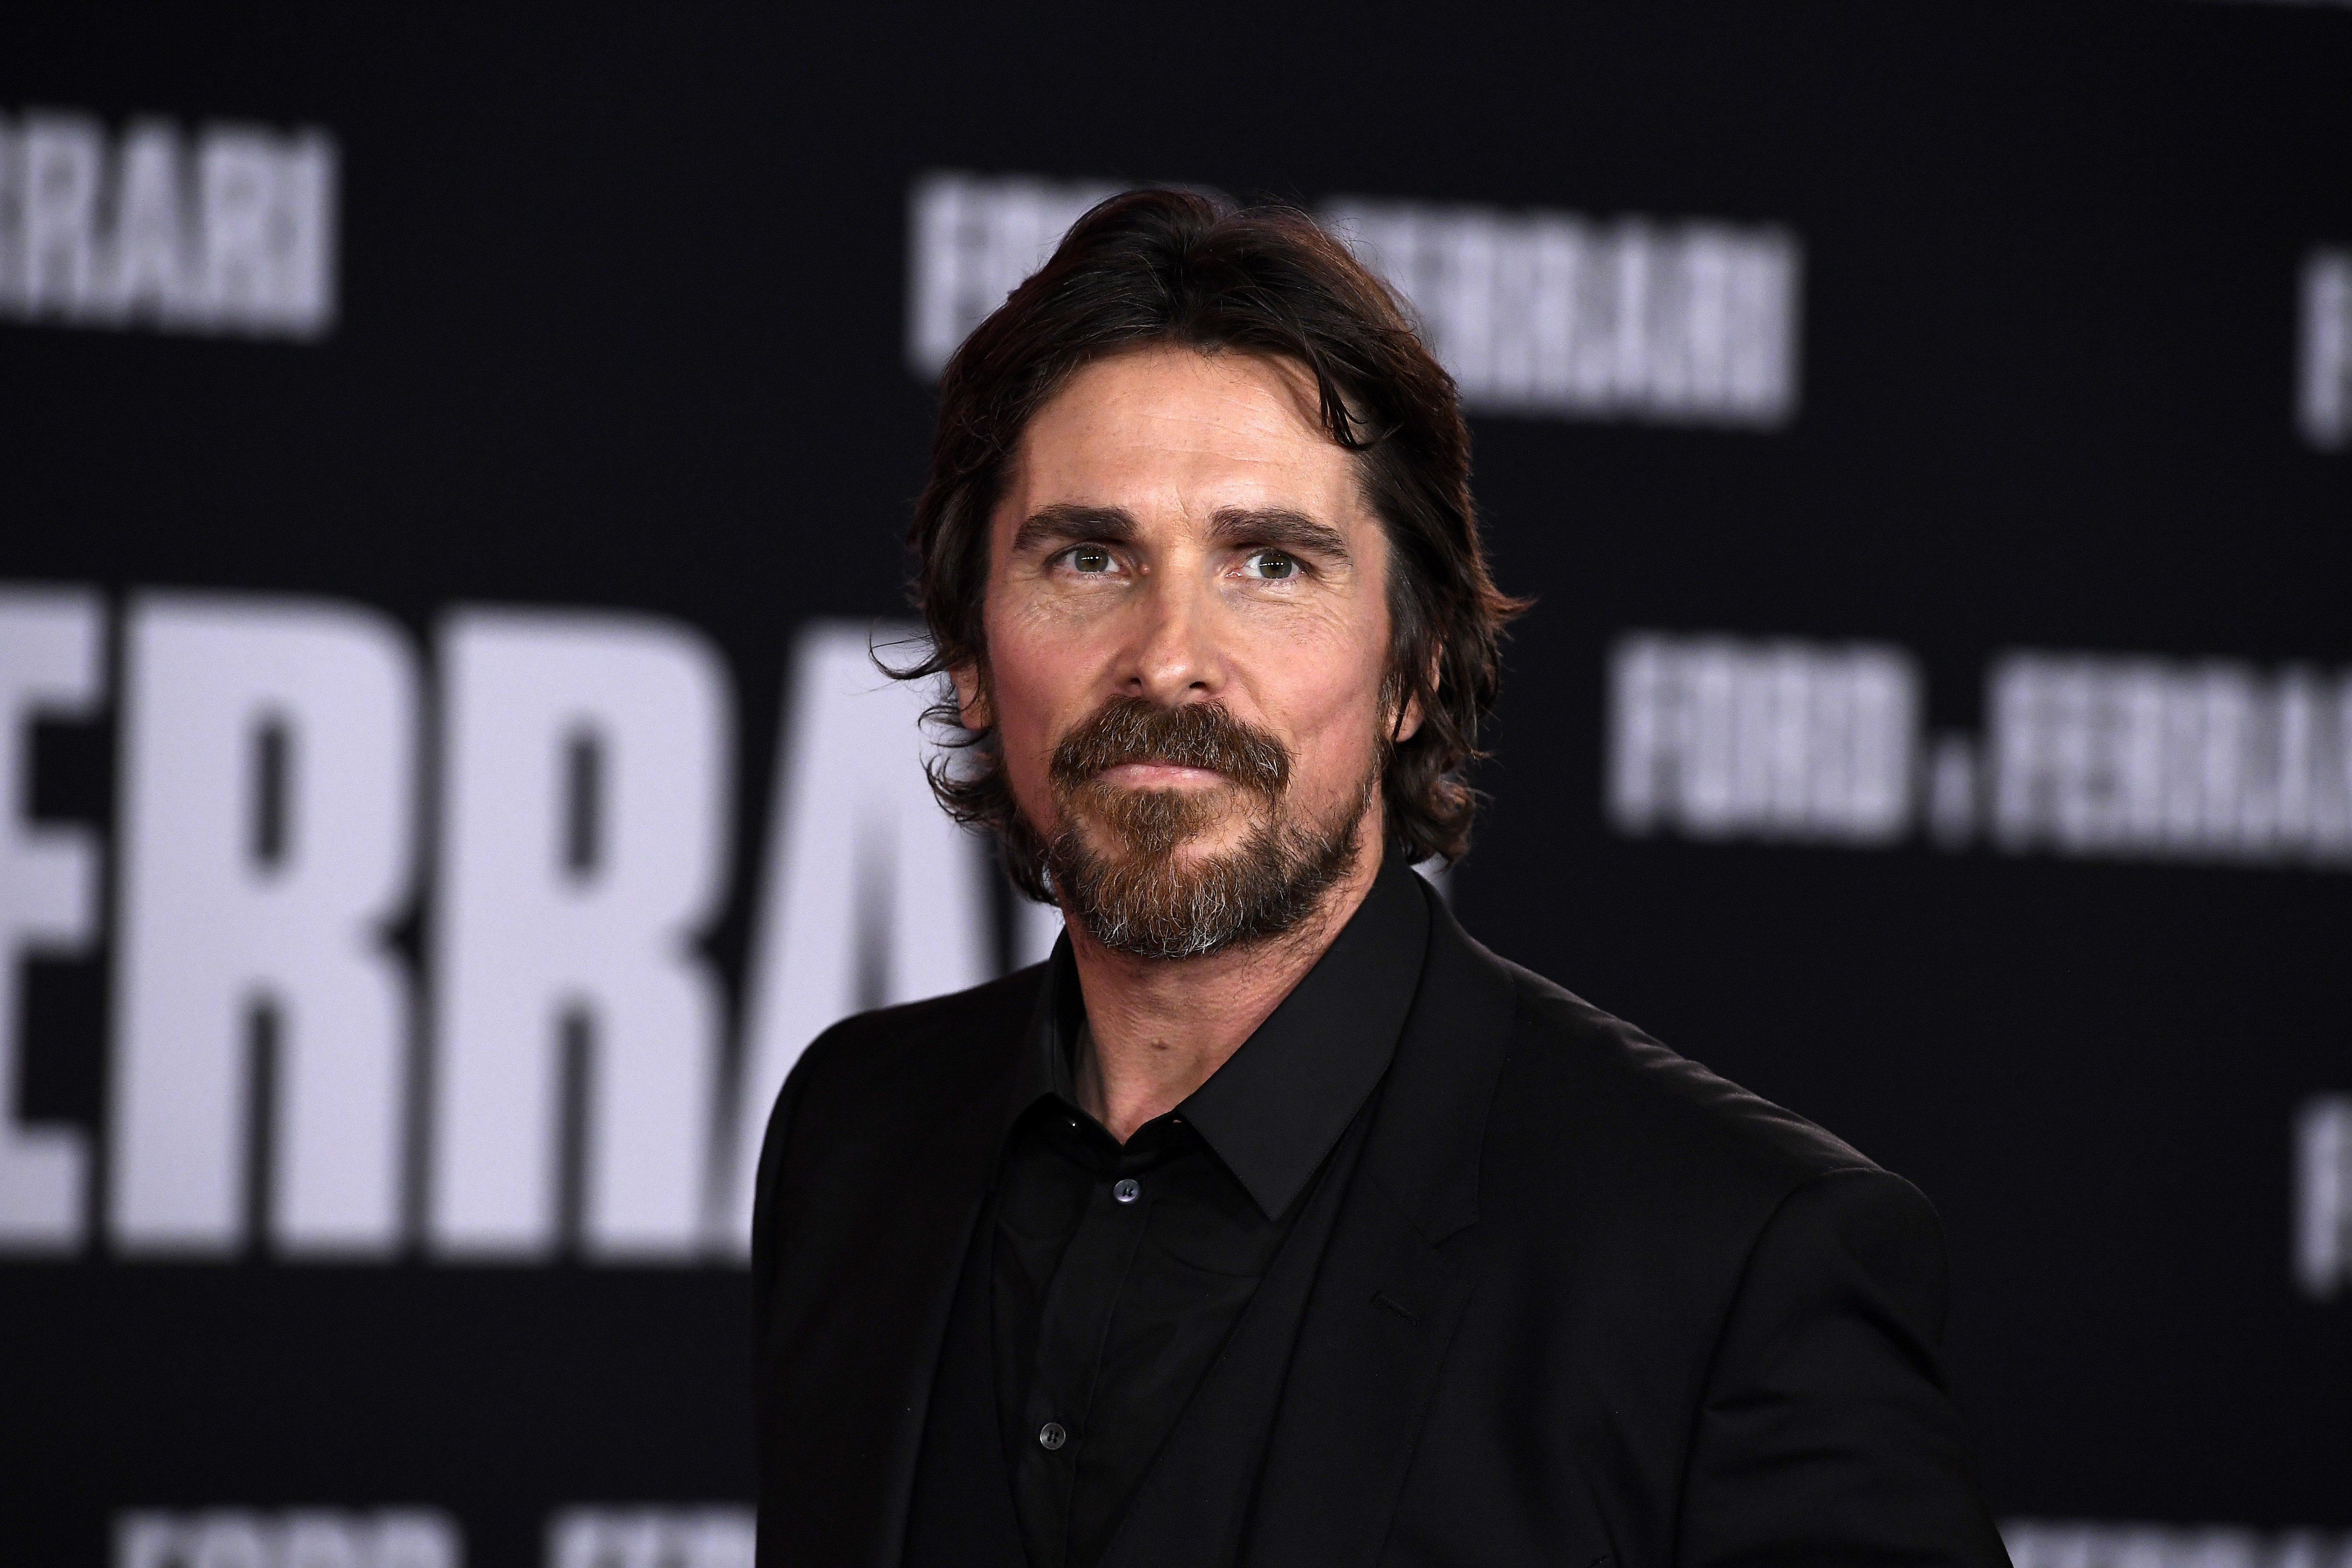 Christian Bale attends the Premiere of FOX's "Ford V Ferrari" at TCL Chinese Theatre on November 4, 2019 in Hollywood, California. | Source: Getty Images